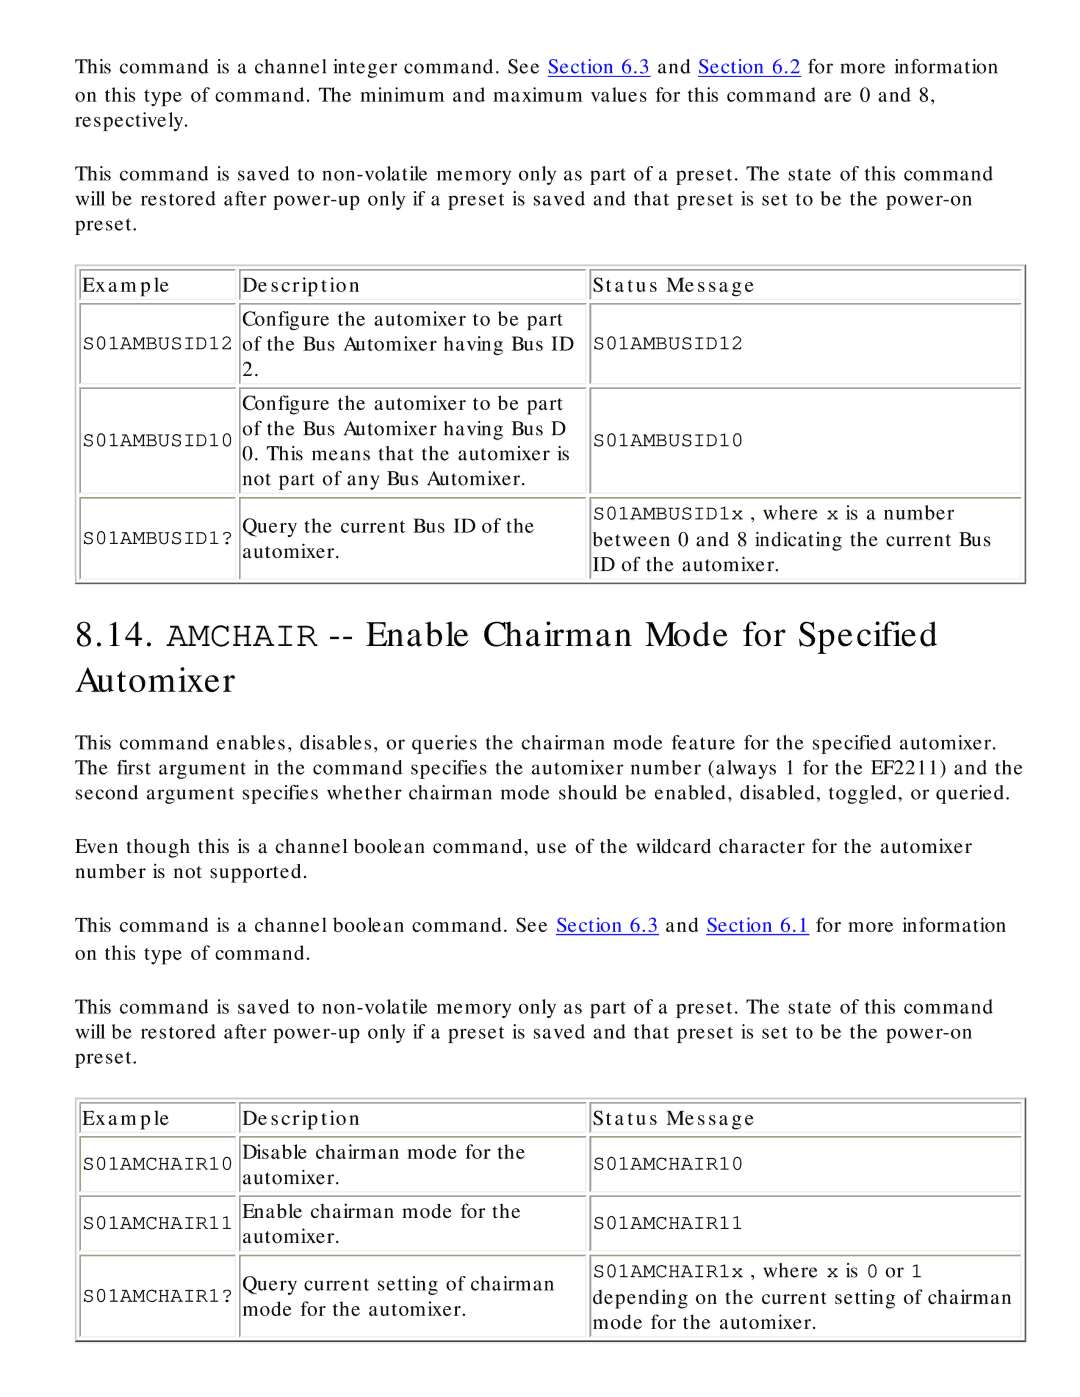 Polycom RS-232 manual Amchair -- Enable Chairman Mode for Specified Automixer 